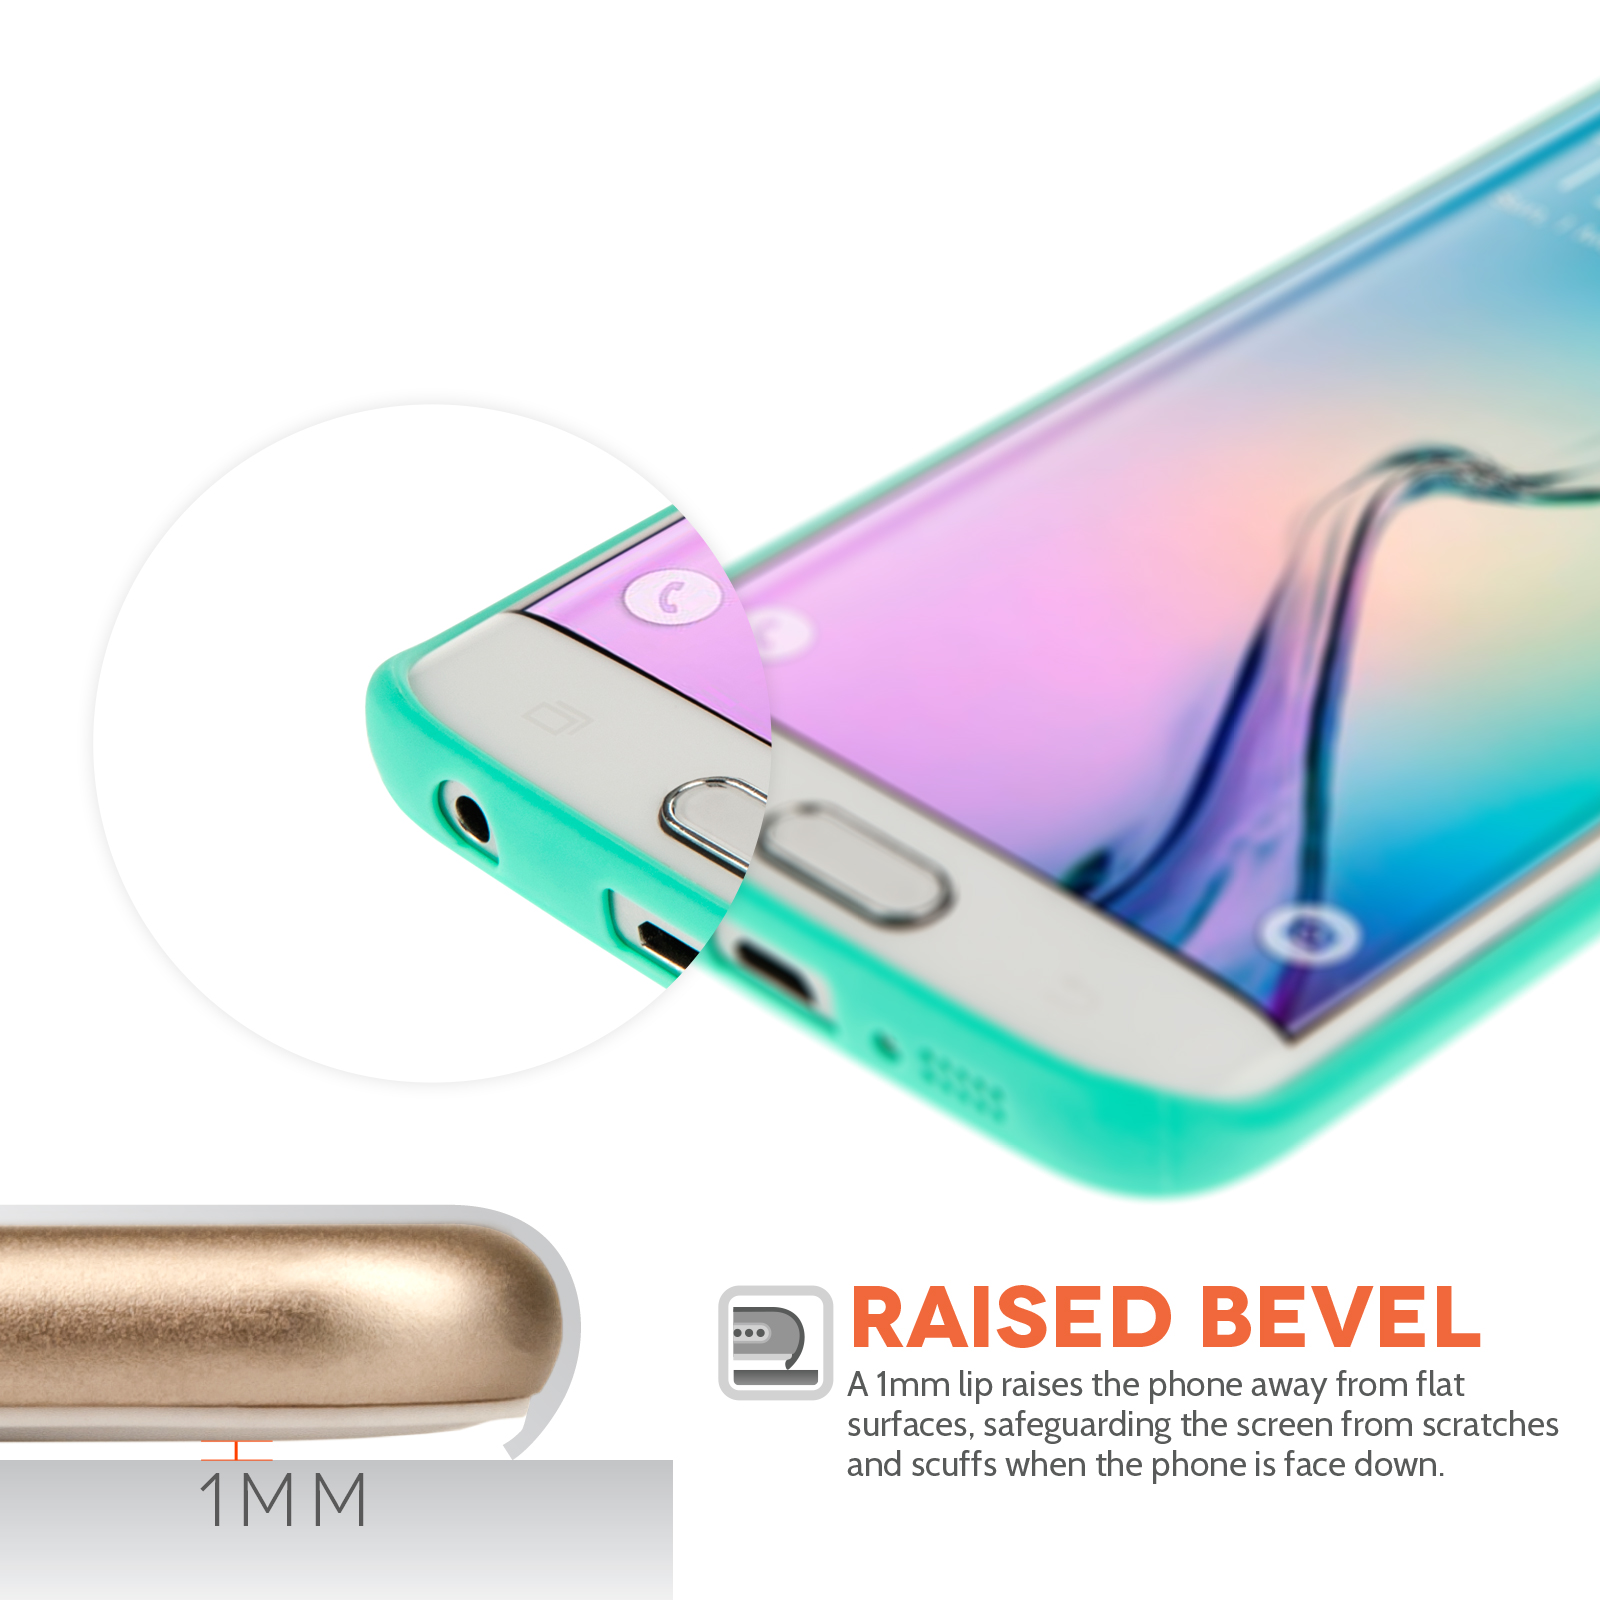 Yousave Accessories Samsung Galaxy S6 Edge New Slim Ultra Thin Gel - Solid Light Blue (Mint Green) Case